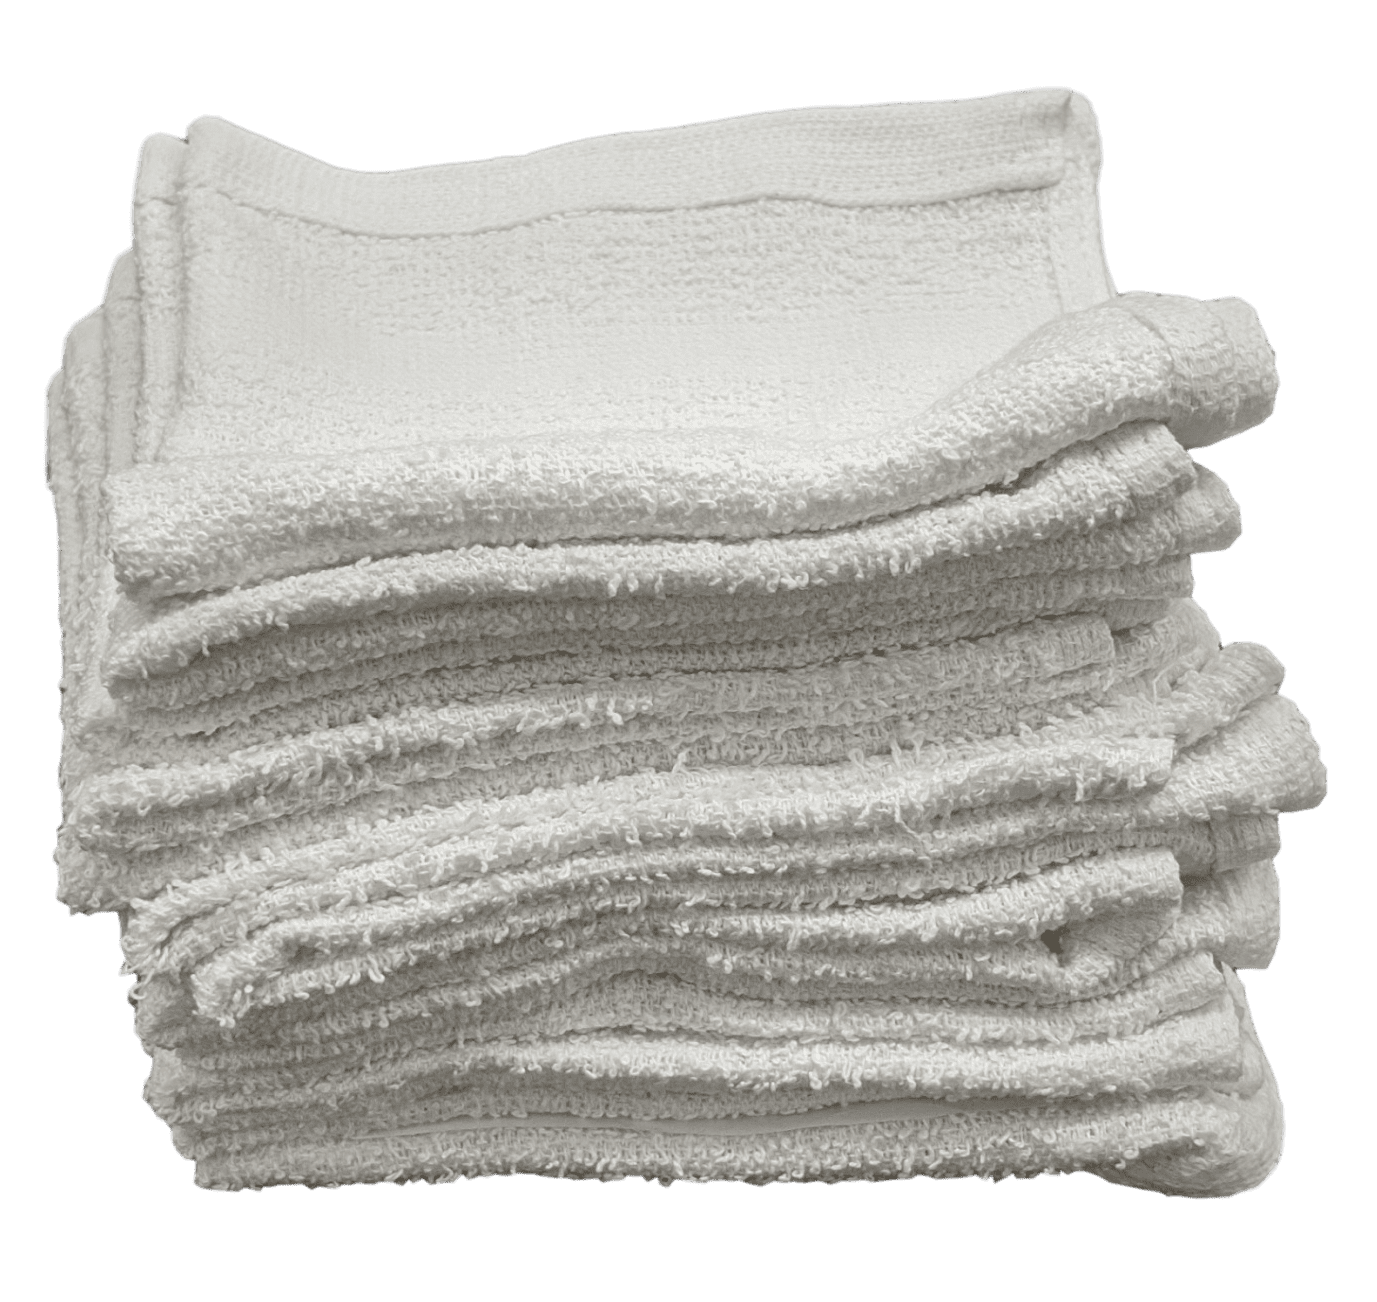 Wiping Cloths Premium 5 Lb White COTTON Terry Cloth Cleaning Towels Rags 